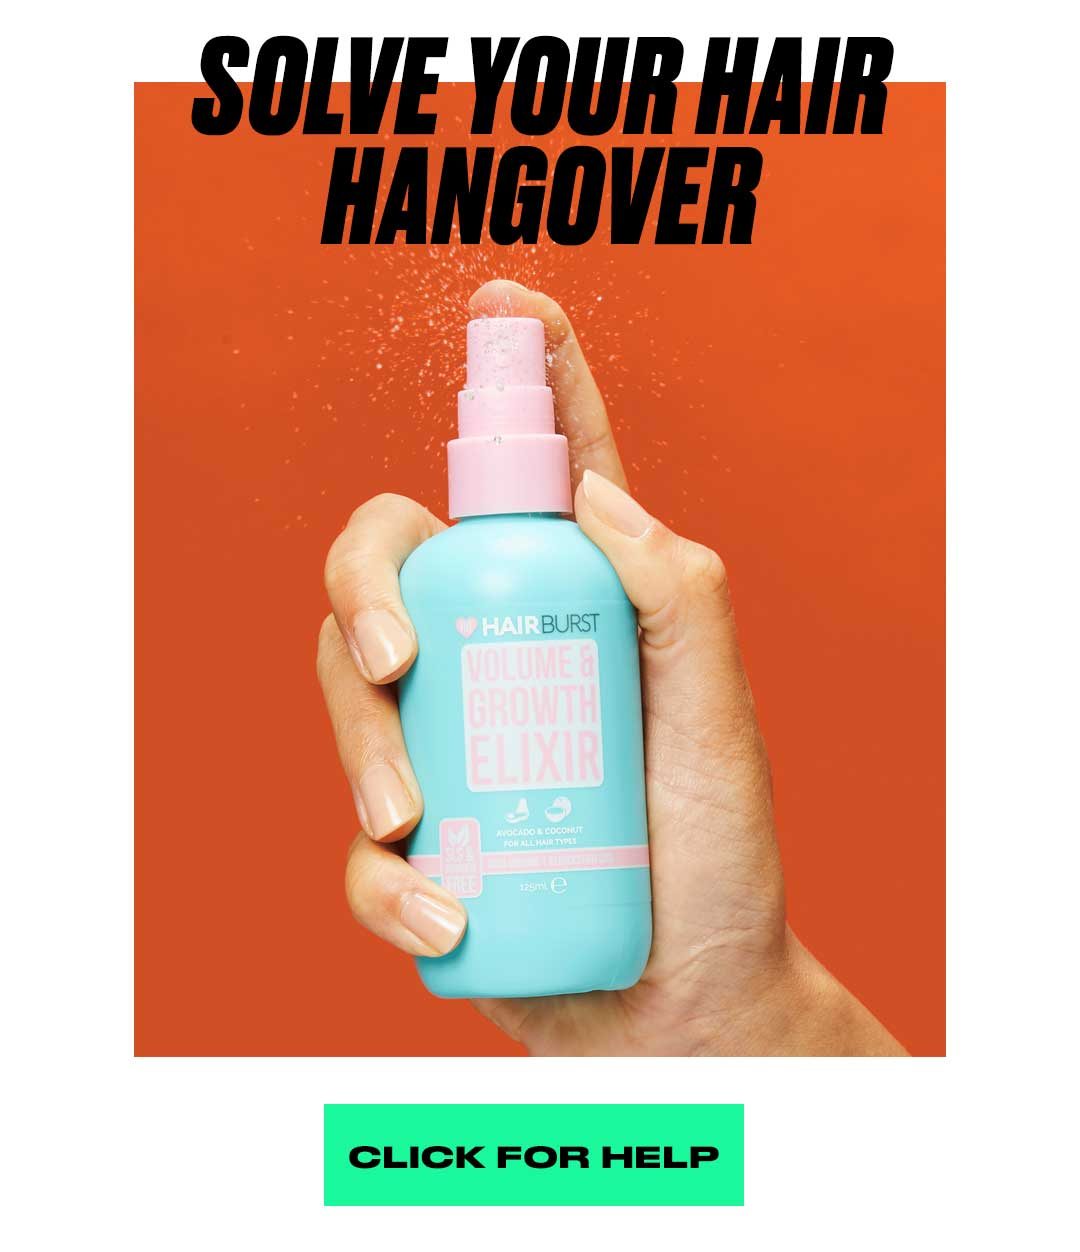 Solve your hair hangover